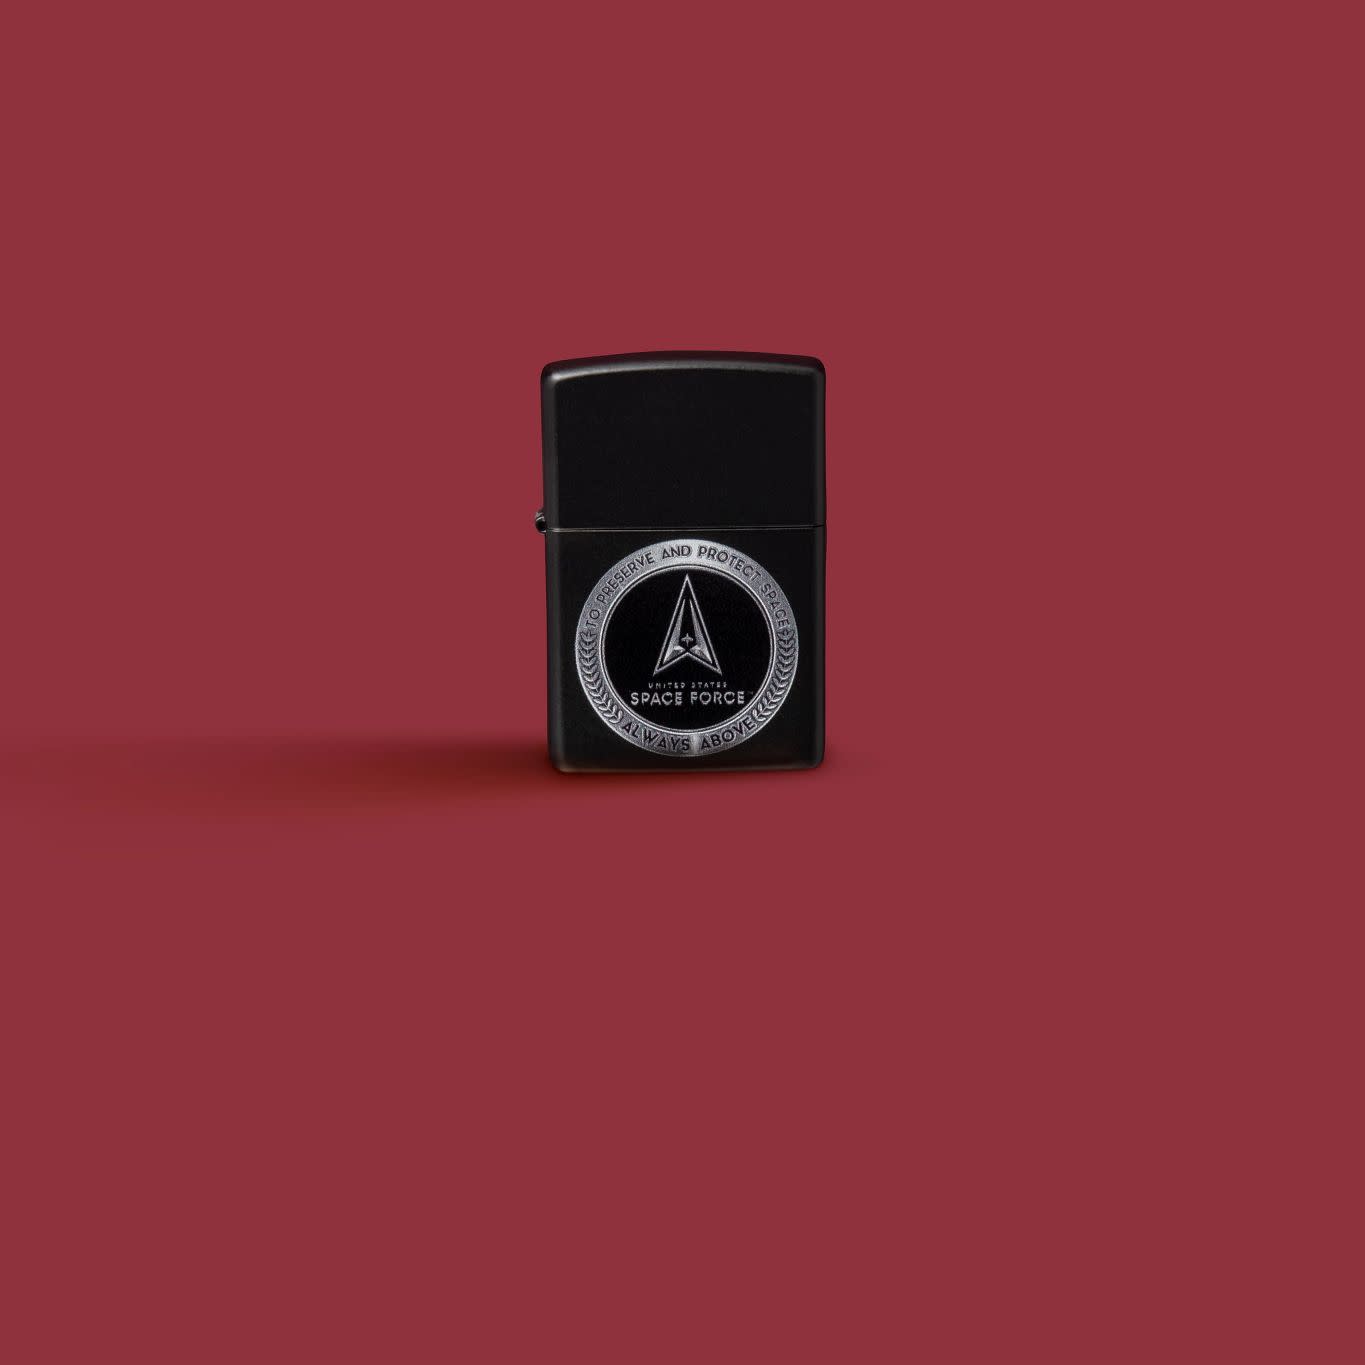 Glamour shot of Zippo U.S. Space Force Design Black Matte Windproof Lighter standing in a red scene.